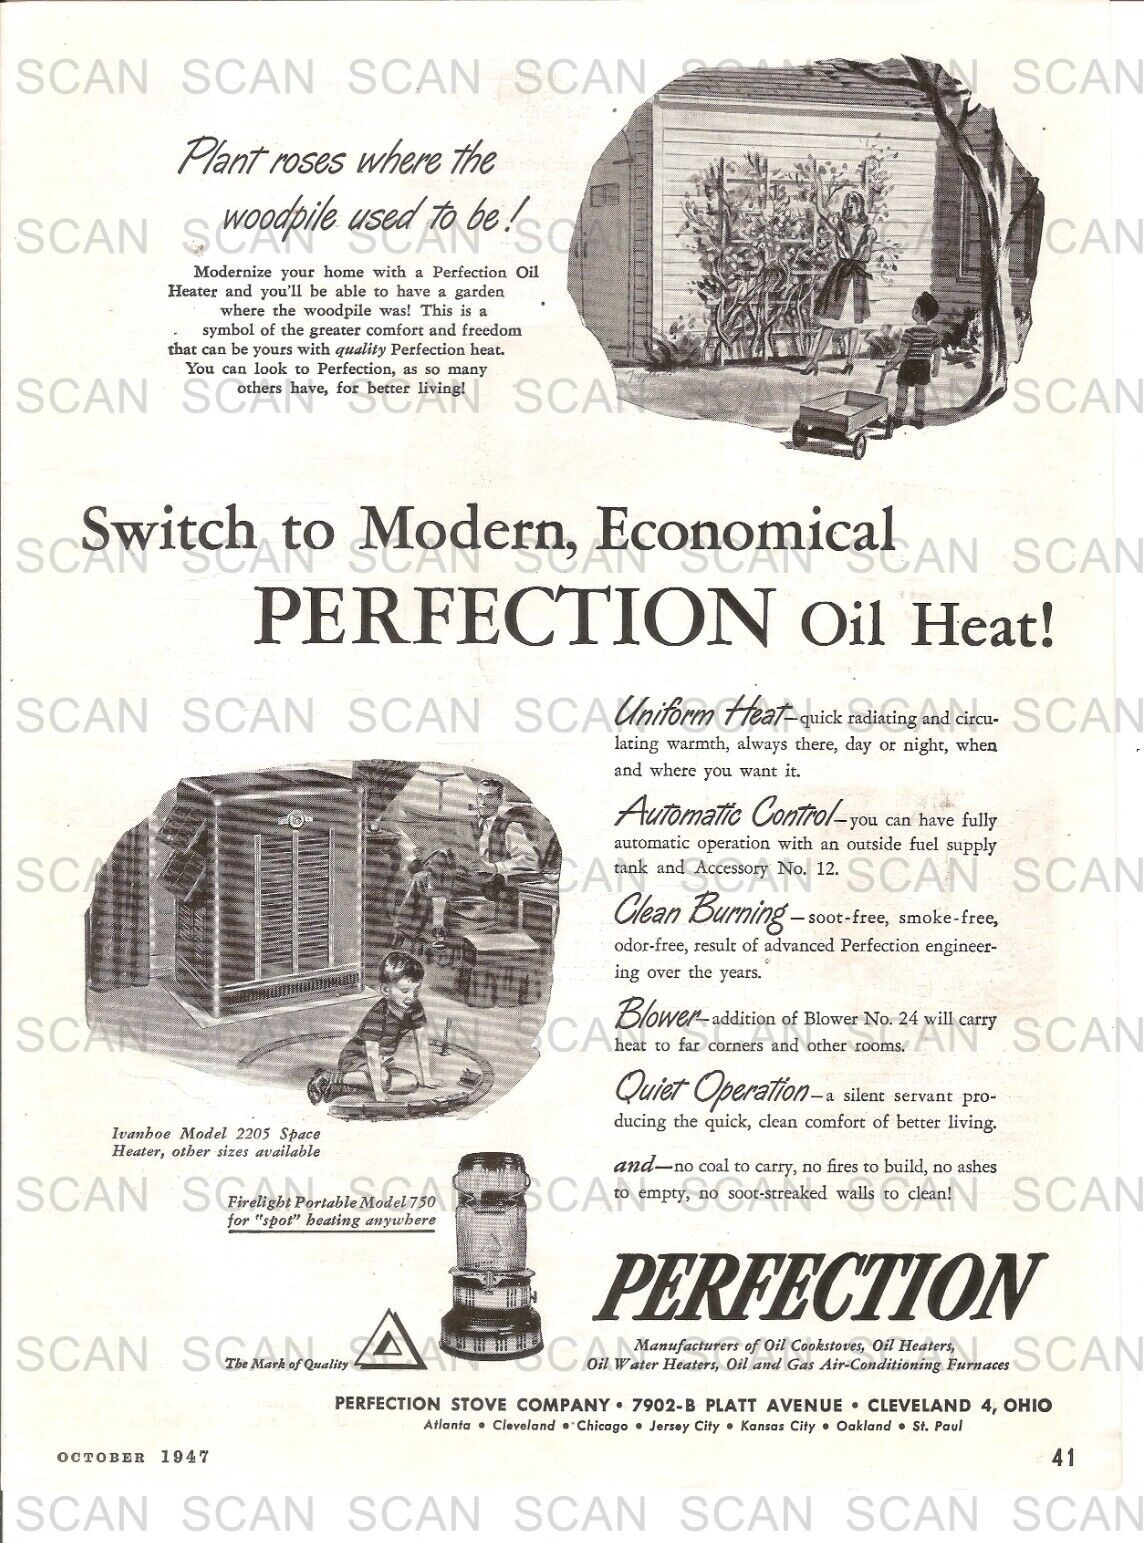 1947 Perfection Stove Co. Vintage Magazine Ad Perfection Oil Heater